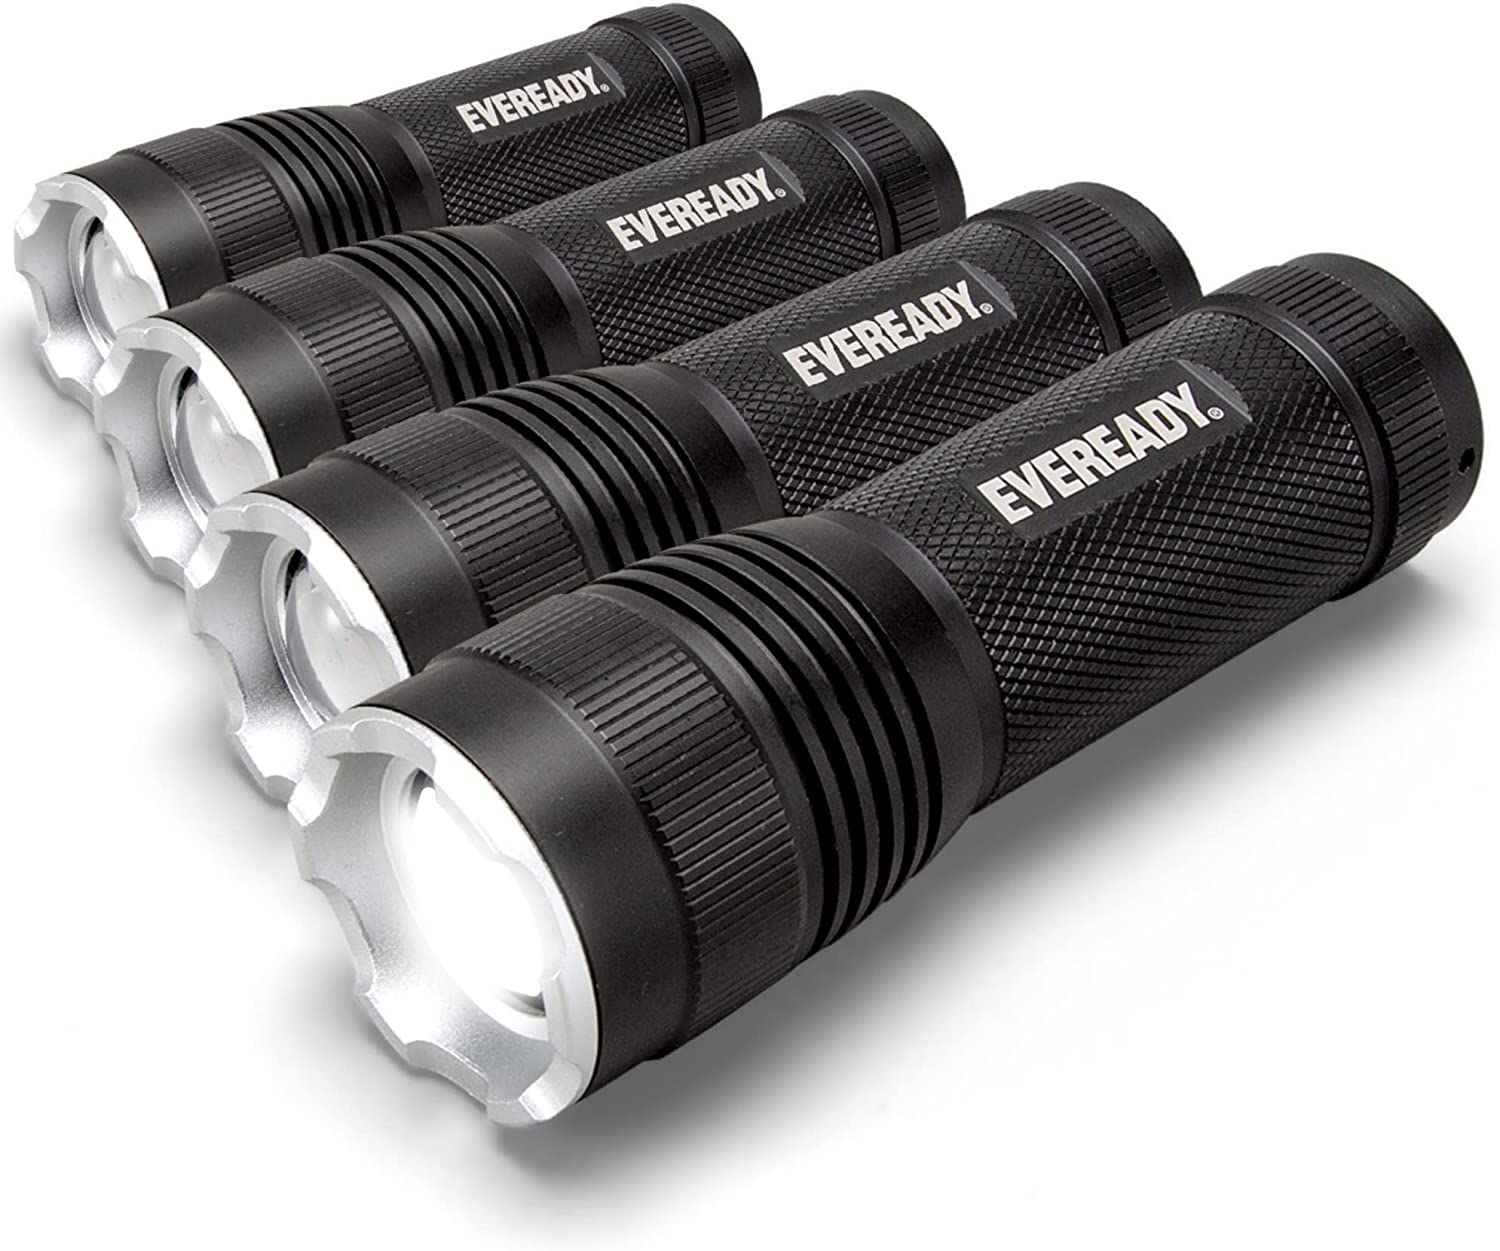 Eveready LED Flashlights (4-Pack) S300 PRO, IPX4 Water Resistant Tactical Flashlight, Bright EDC Torches for Camping, Outdoors, Power Outage Emergencies